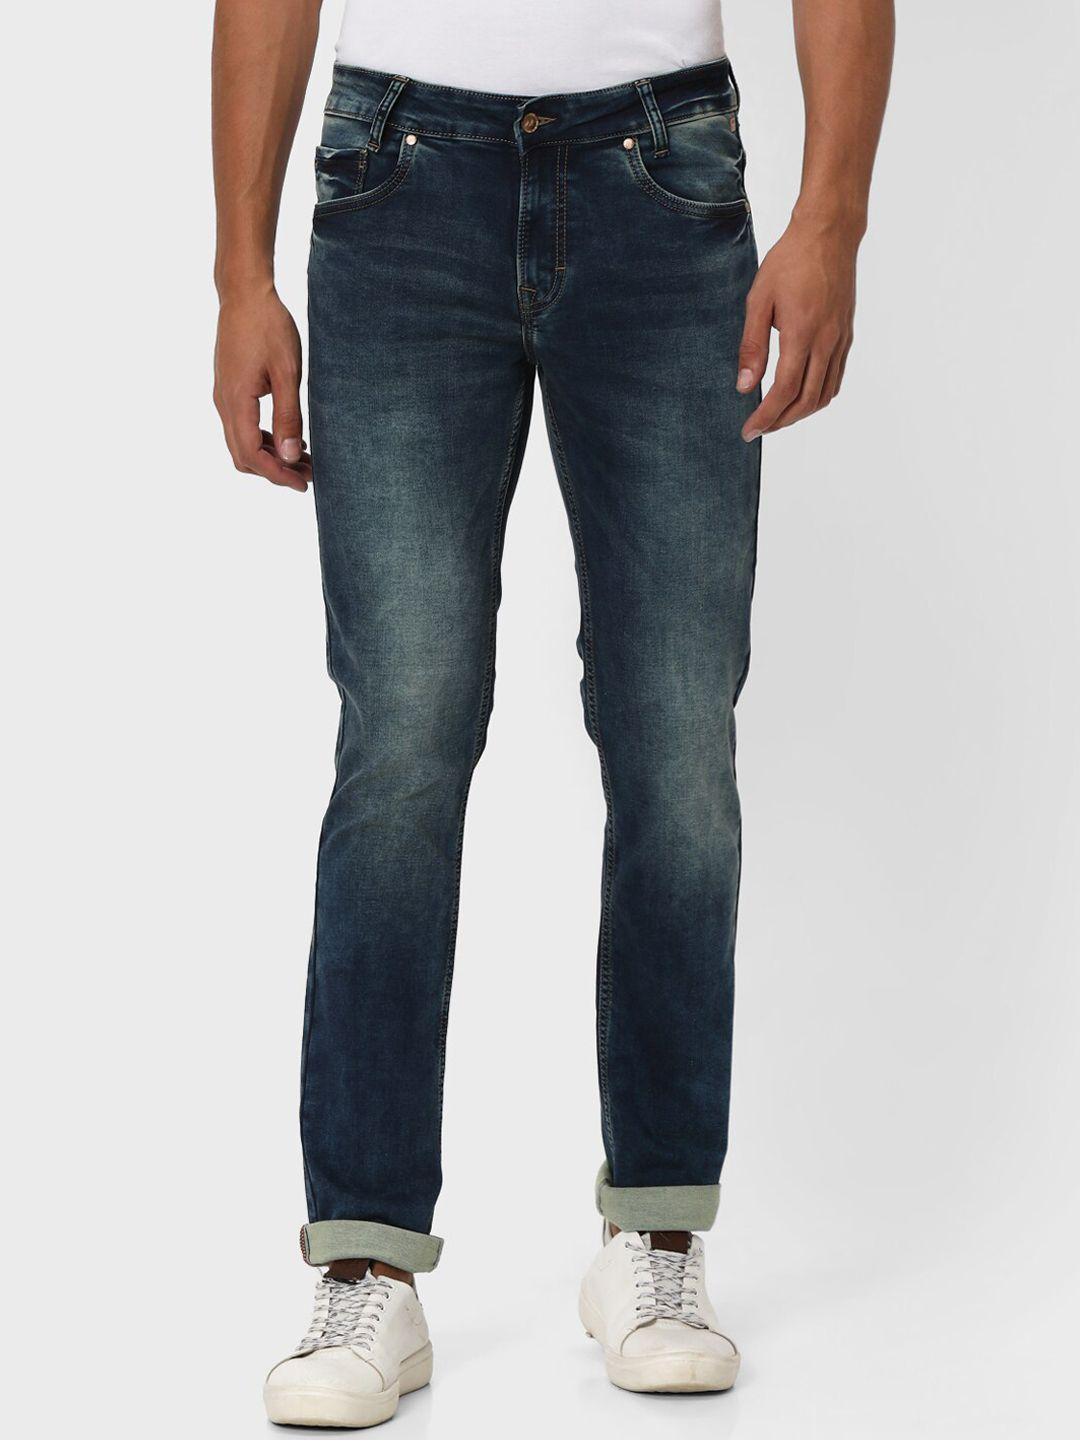 mufti-men-slim-fit-low-distress-heavy-fade-stretchable-jeans